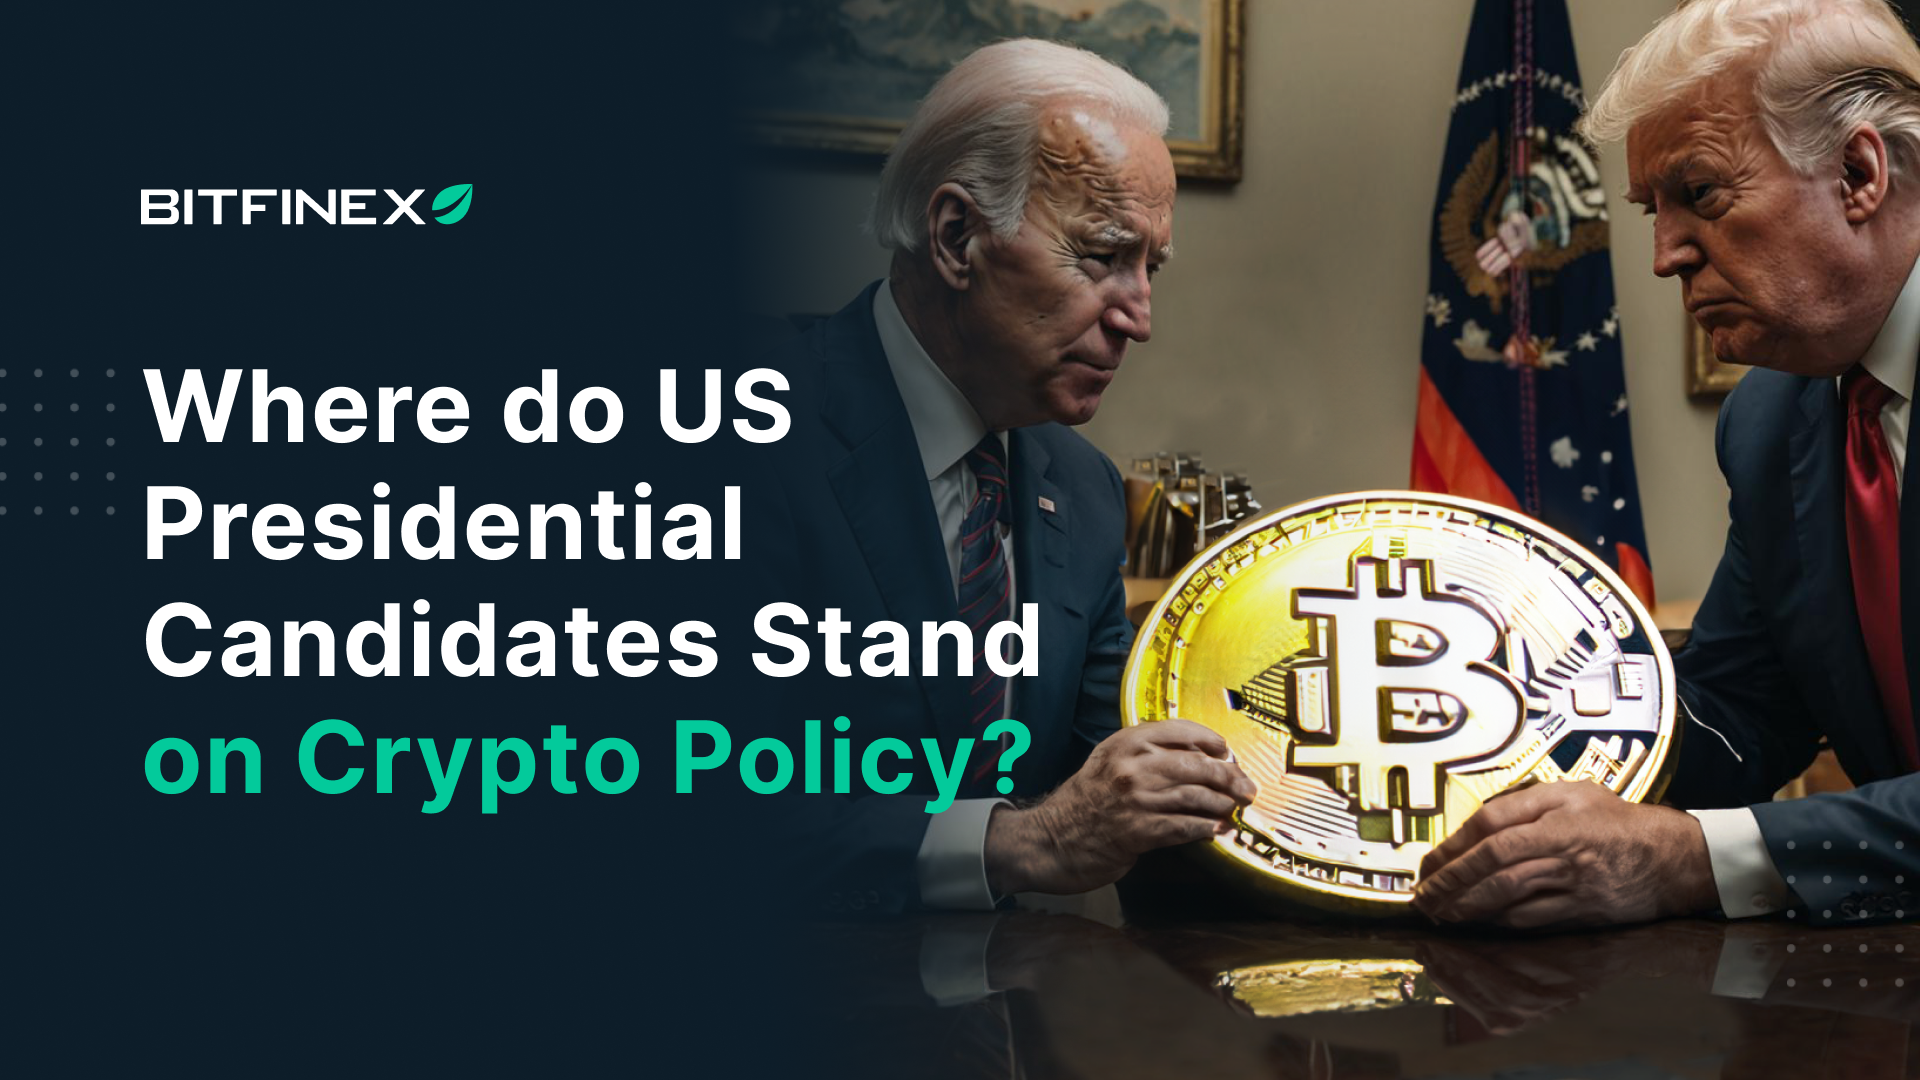 Where do US Presidential Candidates Stand on Crypto Policy?